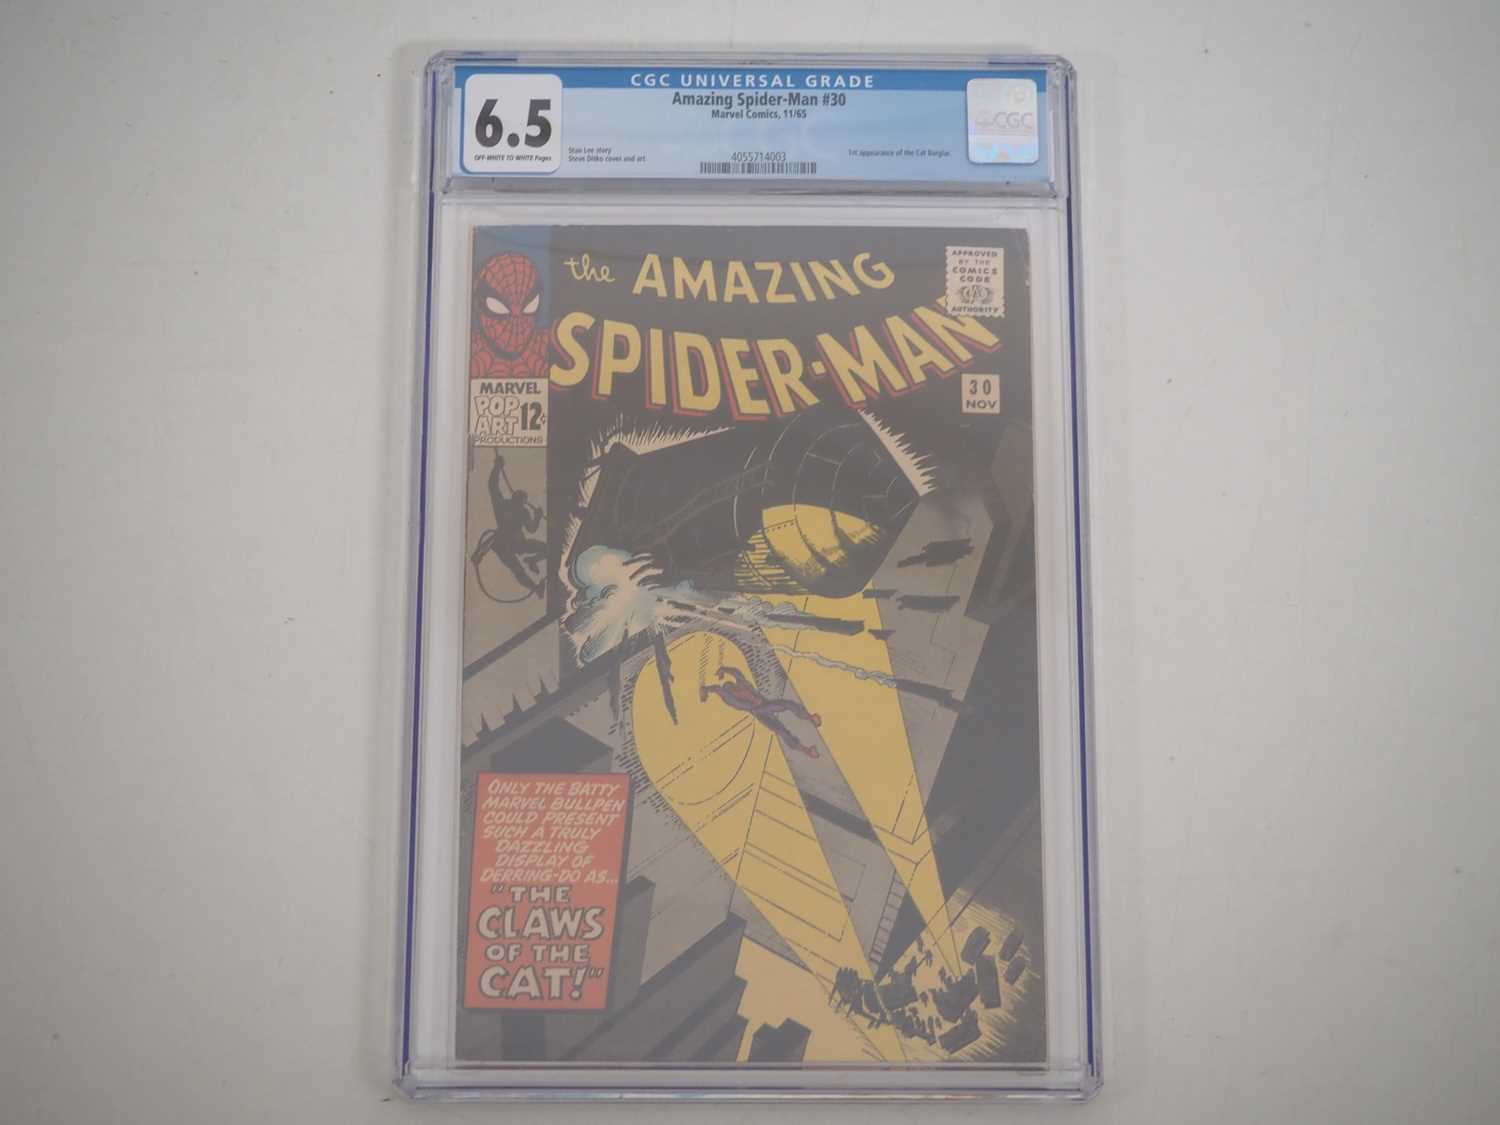 AMAZING SPIDER-MAN #30 (1965 - MARVEL) - GRADED 6.5 (FN+) by CGC - Includes the first appearance